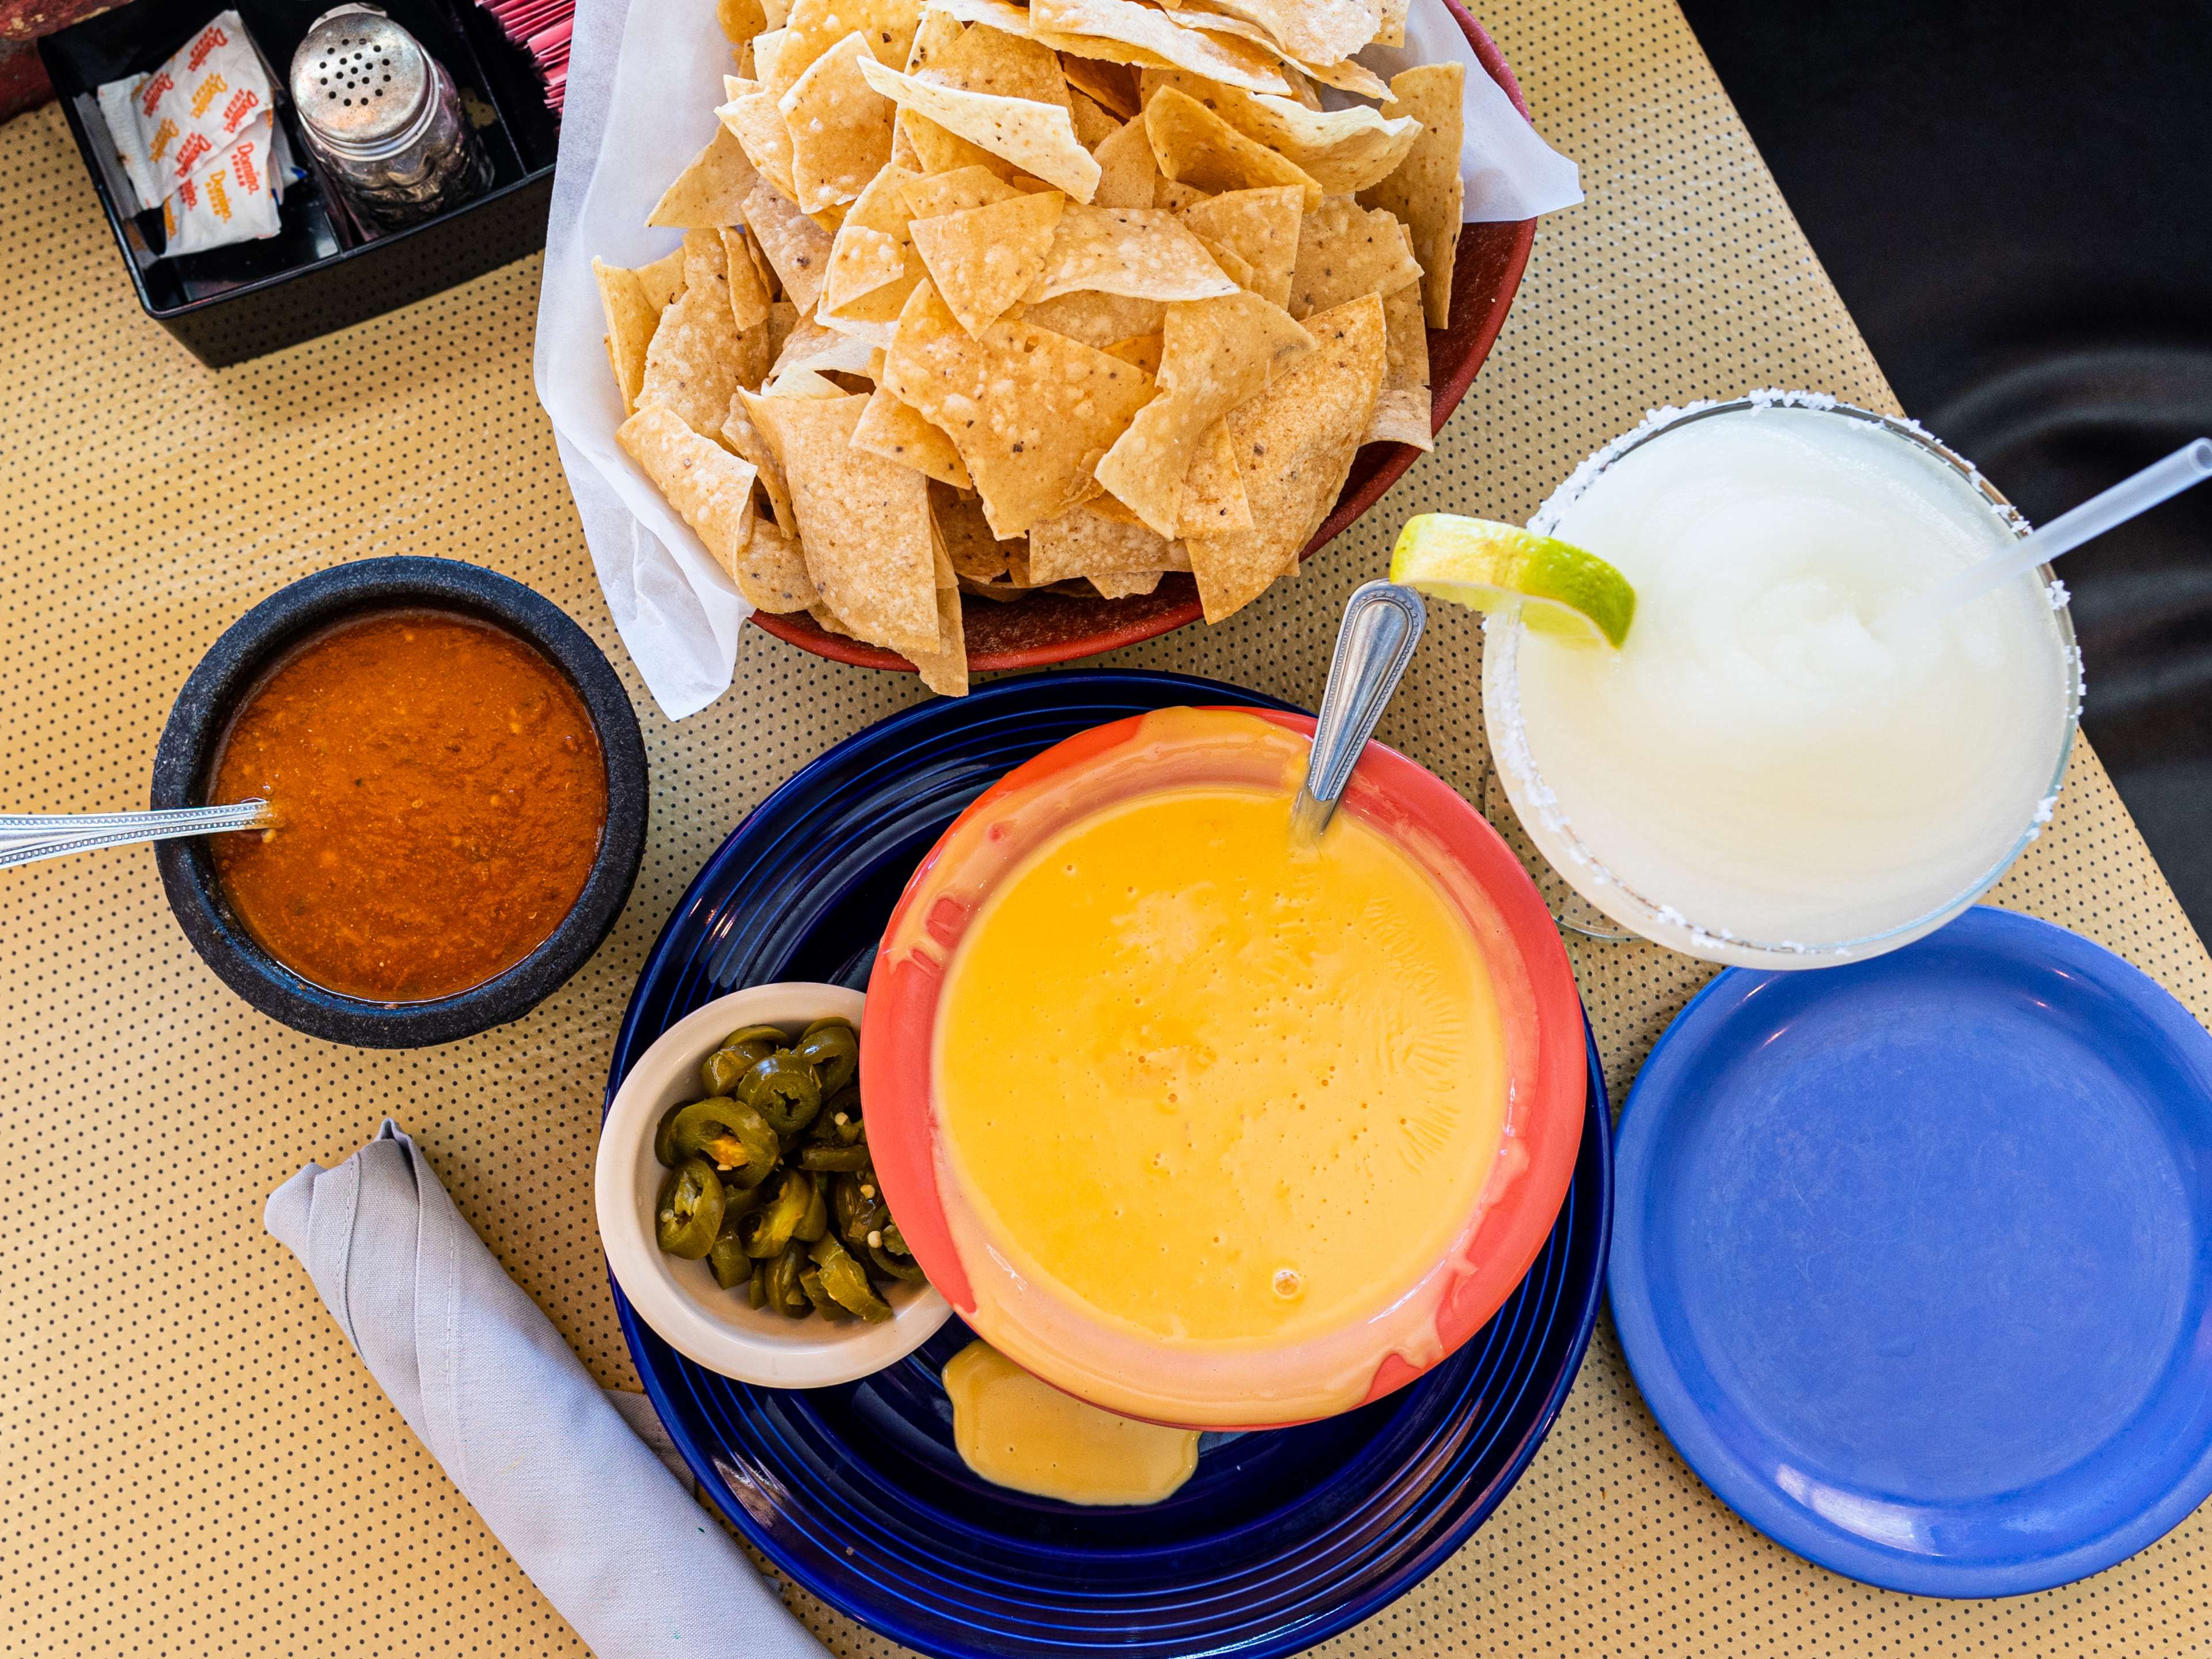 The queso, chips, salsa, and margarita from Tia Maria’s.